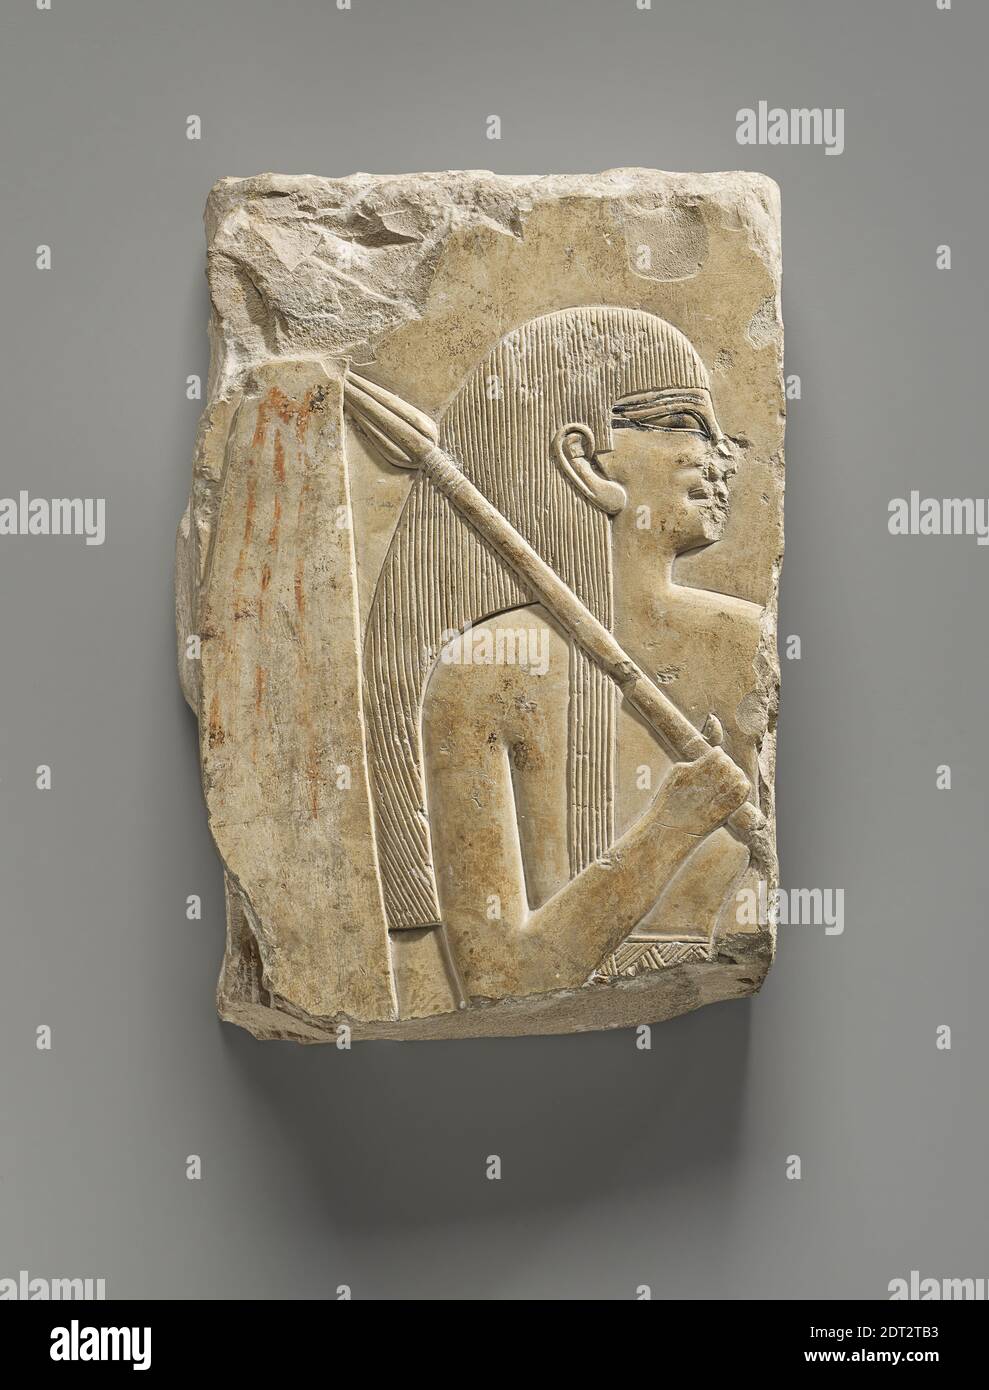 Relief Depicting a Sunshade Bearer, Painted limestone, 19.5 × 13 cm (7 11/16 × 5 1/8 in.), Egyptian, Dynasty 11, Reign of Neb-hepet-re Montuhotep, Sculpture Stock Photo